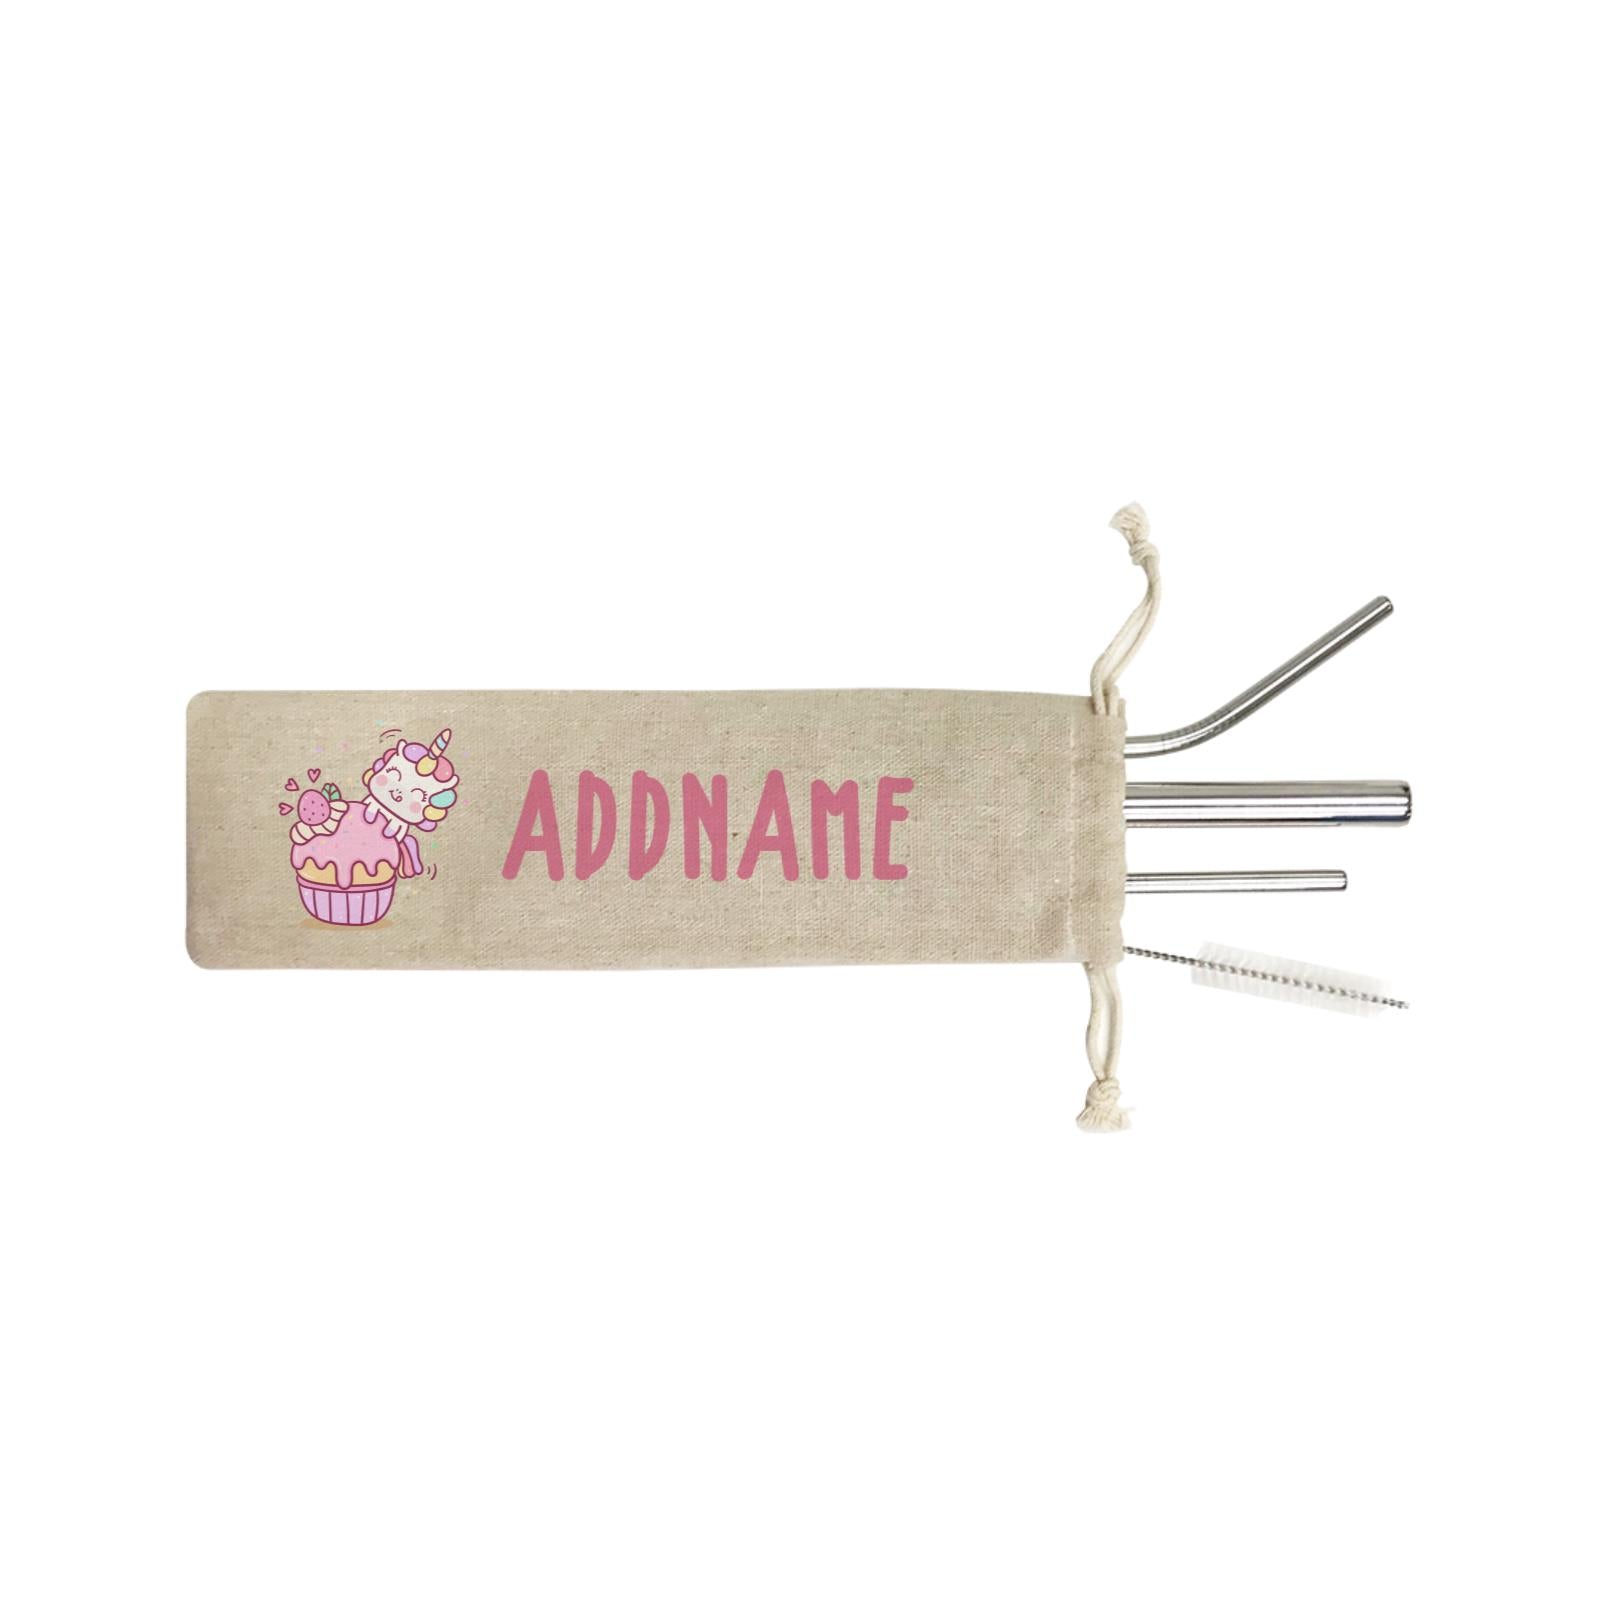 Unicorn And Princess Series Unicorn And Cupcake Addname SB 4-In-1 Stainless Steel Straw Set in Satchel